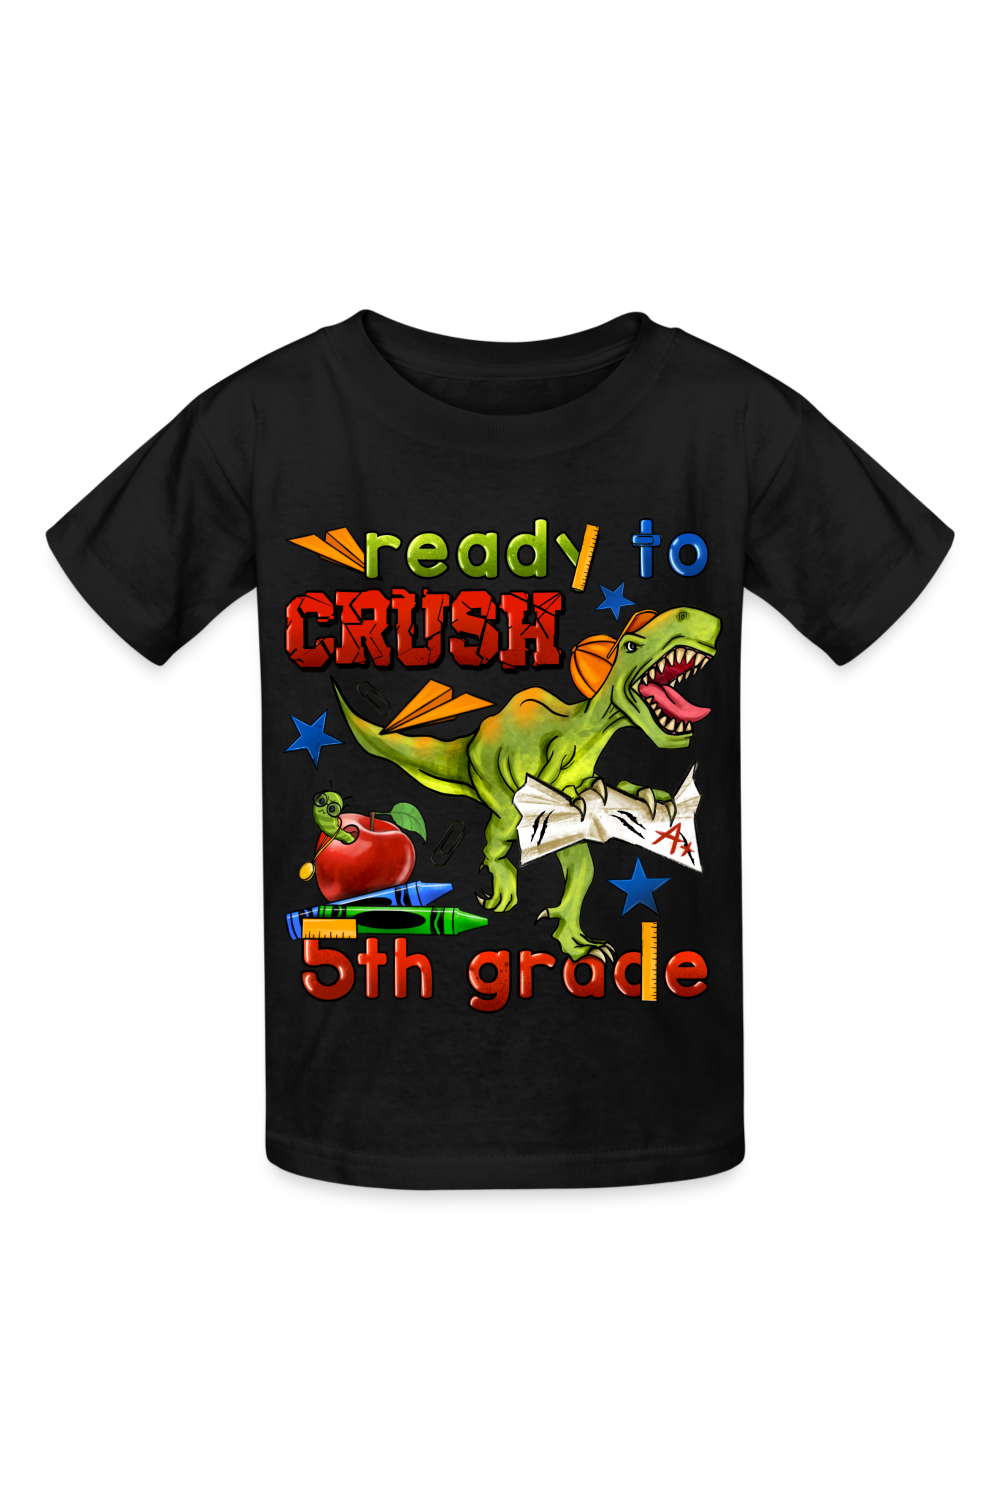 Boys Ready To Crush Fifth Grade Short Sleeve Tee Shirts for Back To School - black